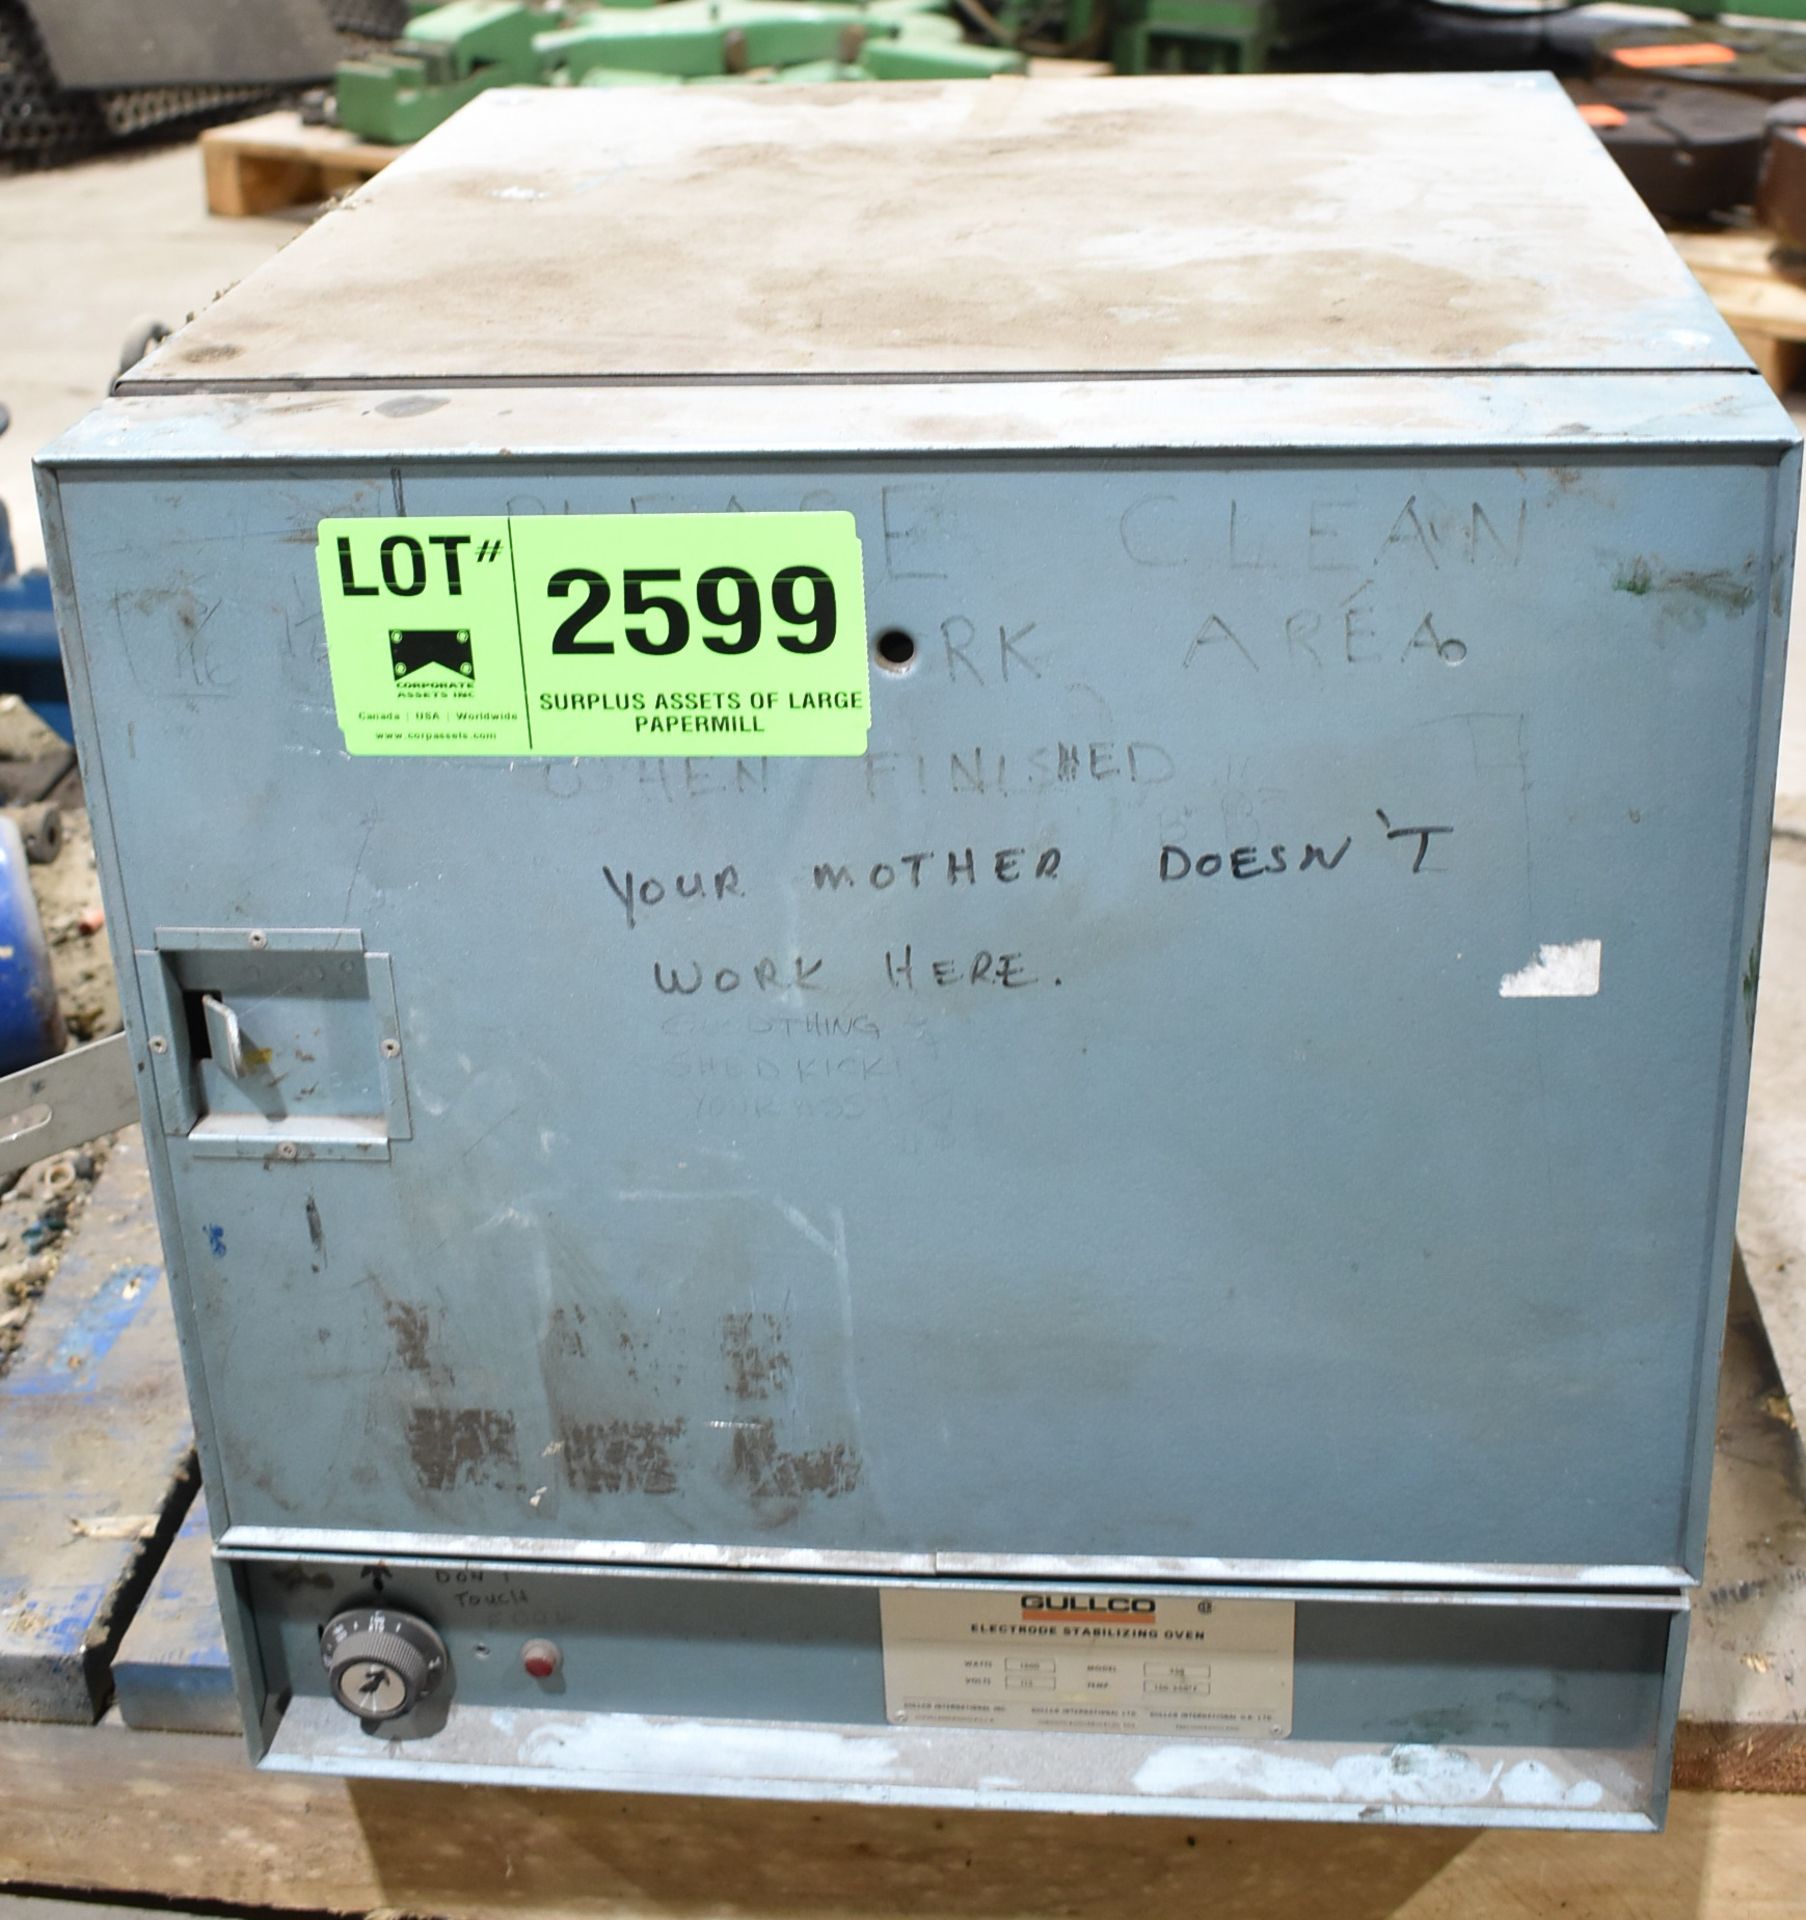 GULLCO MODEL 350 ELECTRODE STABILIZING OVEN WITH 550 DEG. F. MAX. TEMPERATURE, S/N: N/A [RIGGING FEE